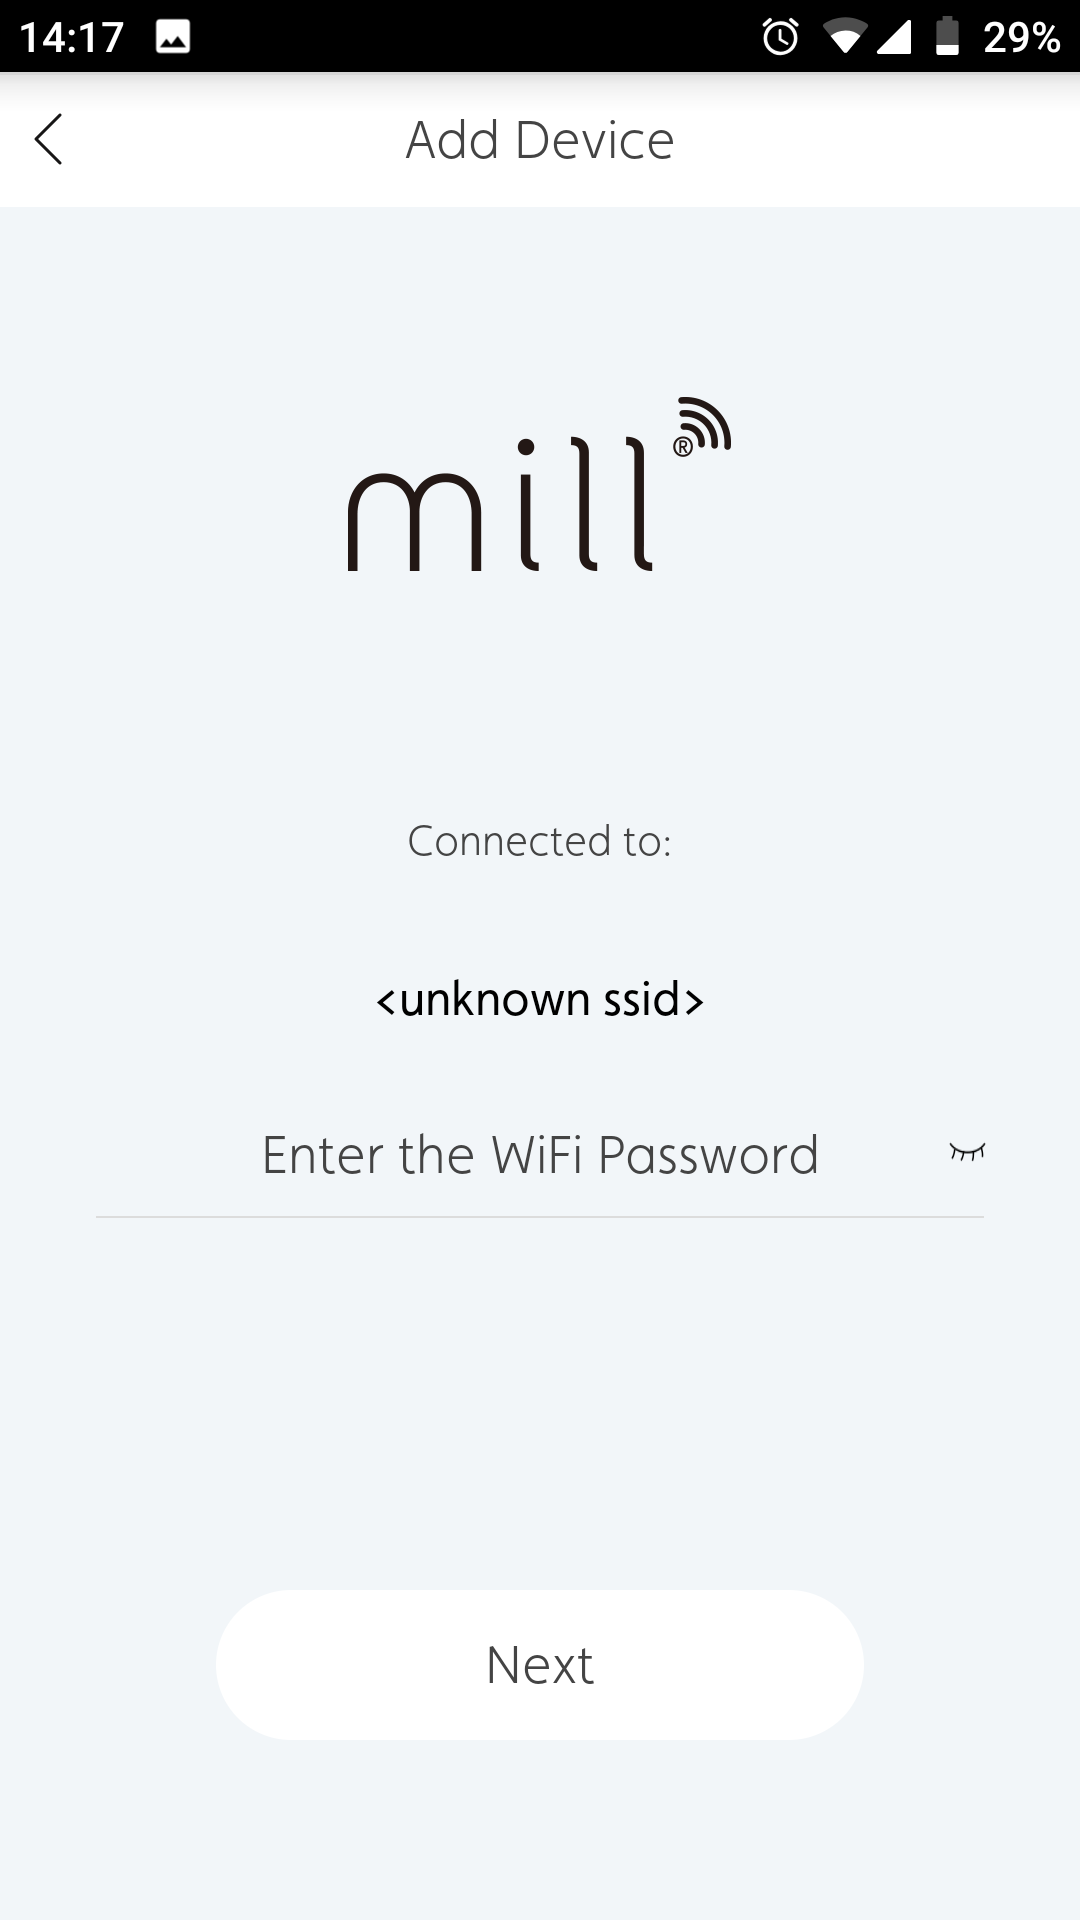 Connect to Wi-Fi